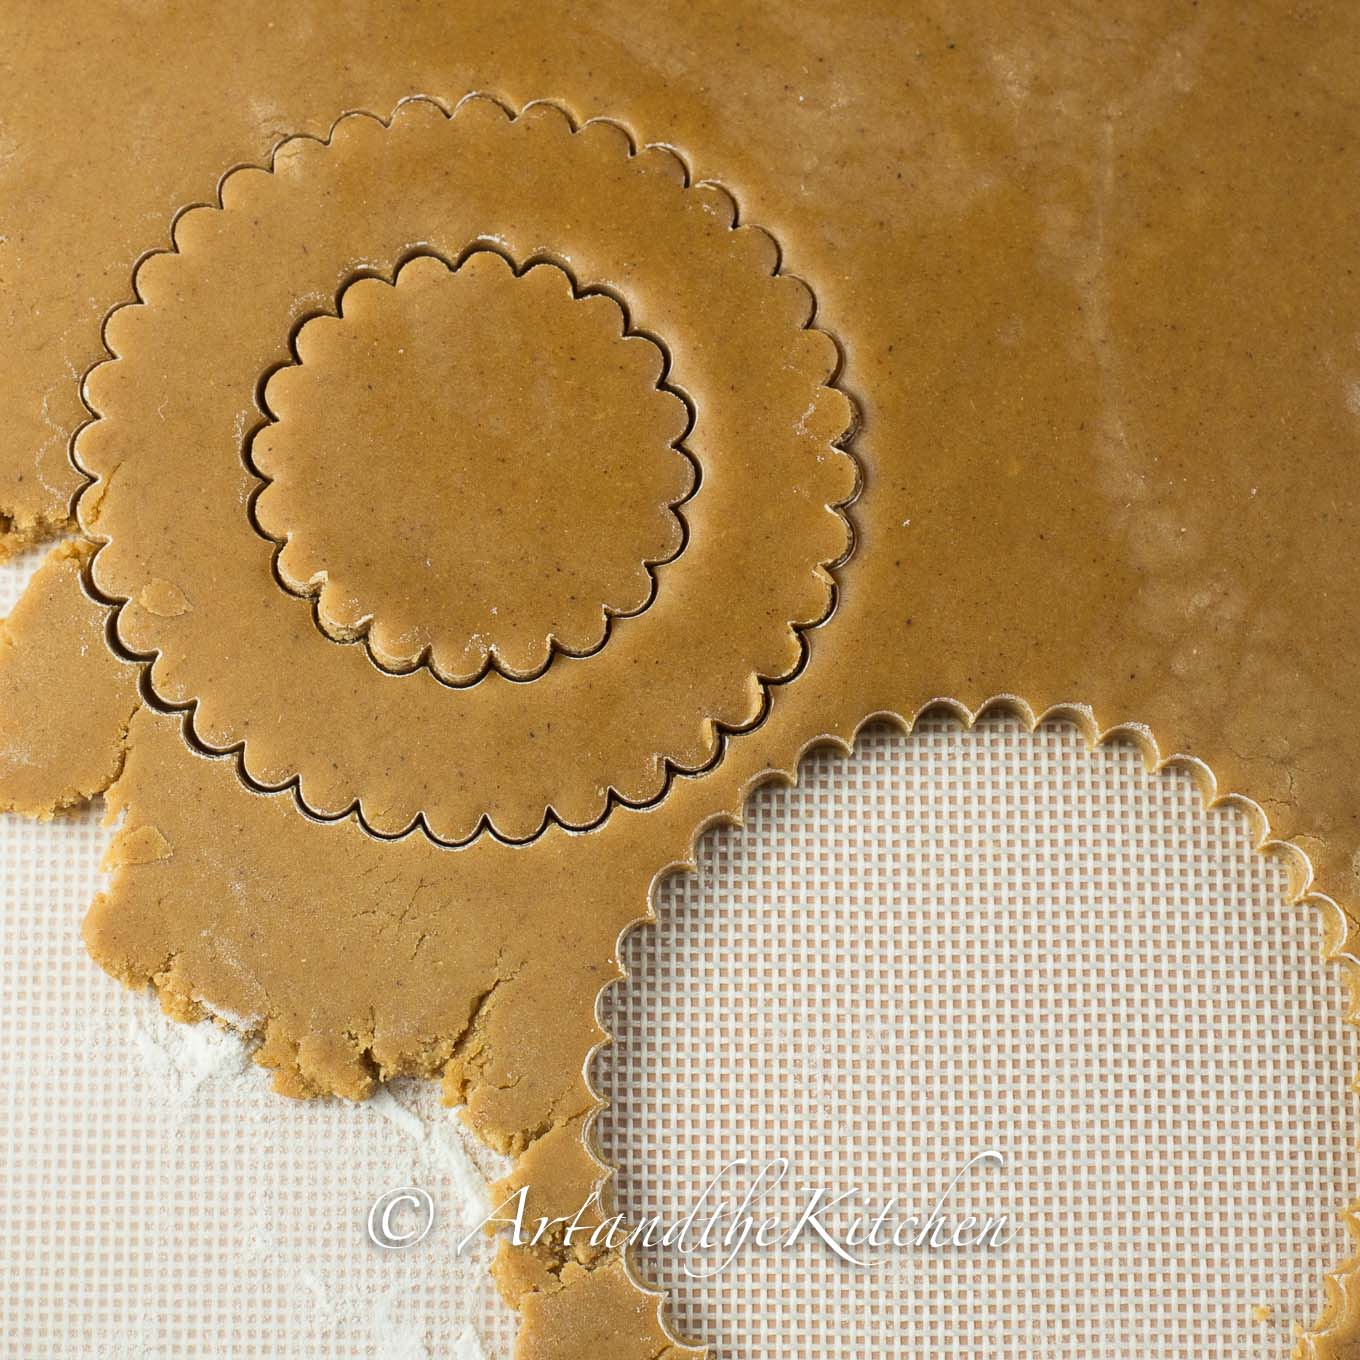 Rolled out gingerbread dough cut into circle shapes.